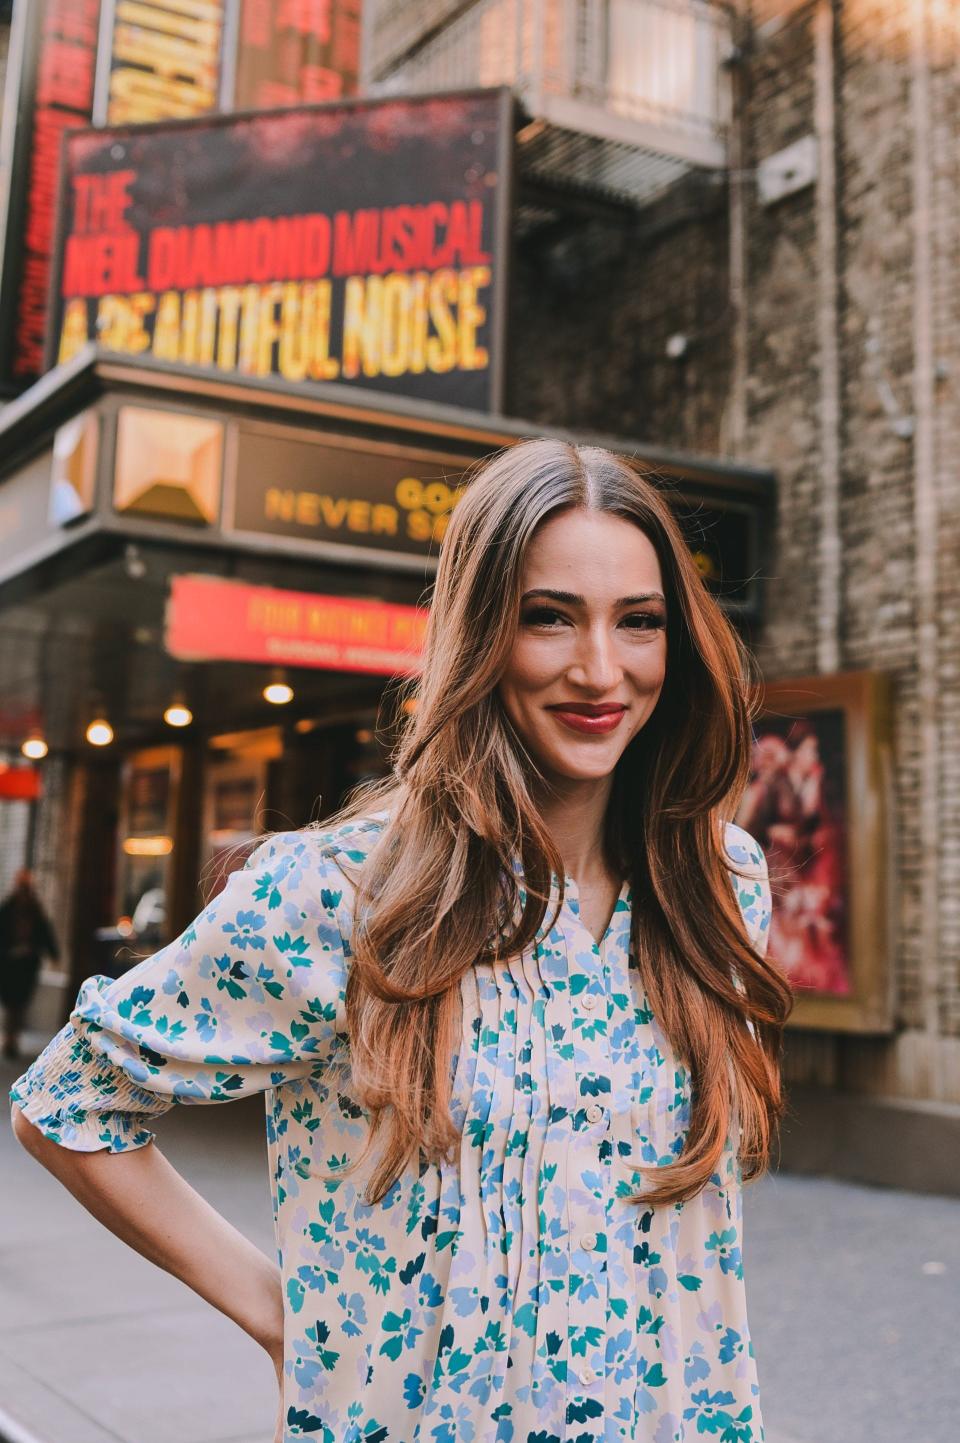 Amber Ardolino outside the Broadhurst Theatre in Manhattan, where the Beaver County native stars in "A Beautiful Noise."